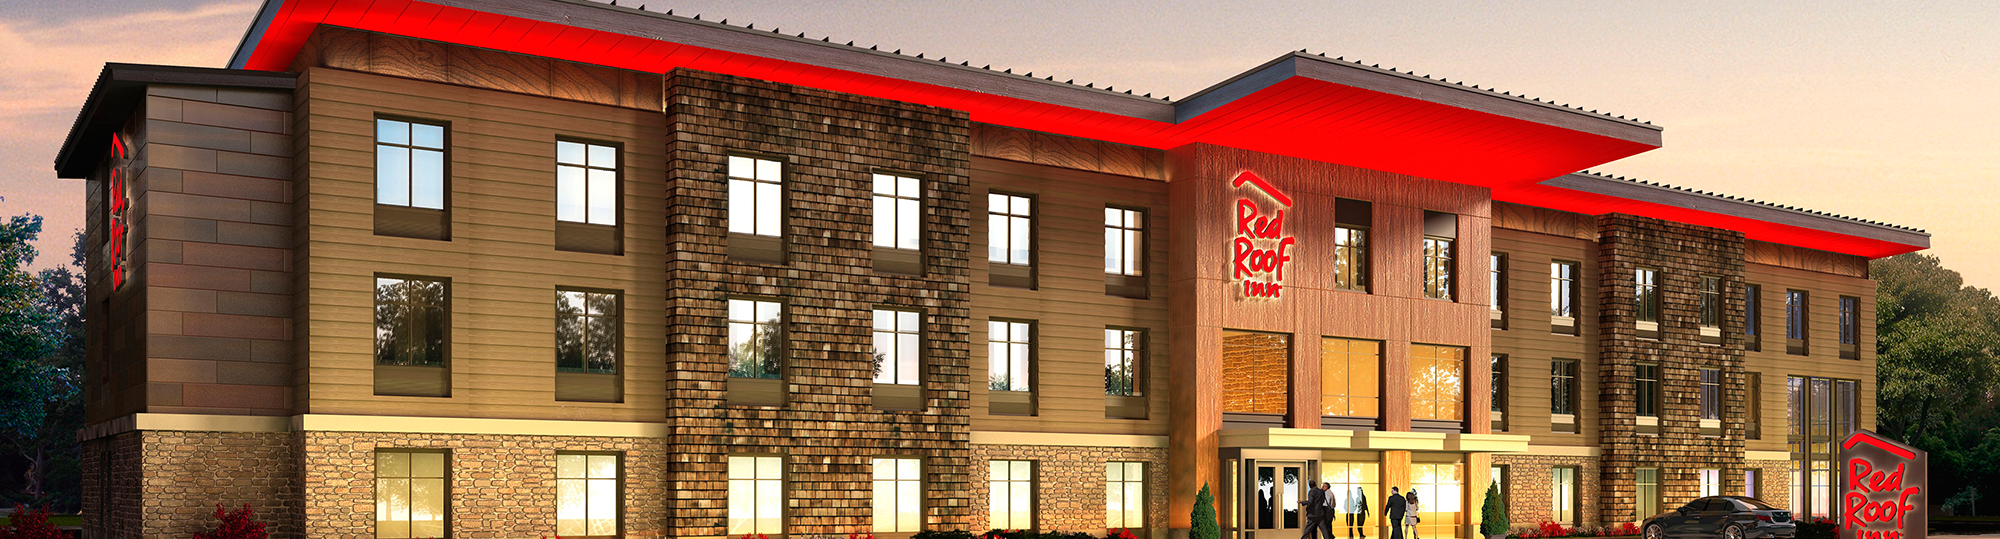 Red Roof Inn Military Discounts with Veterans Advantage